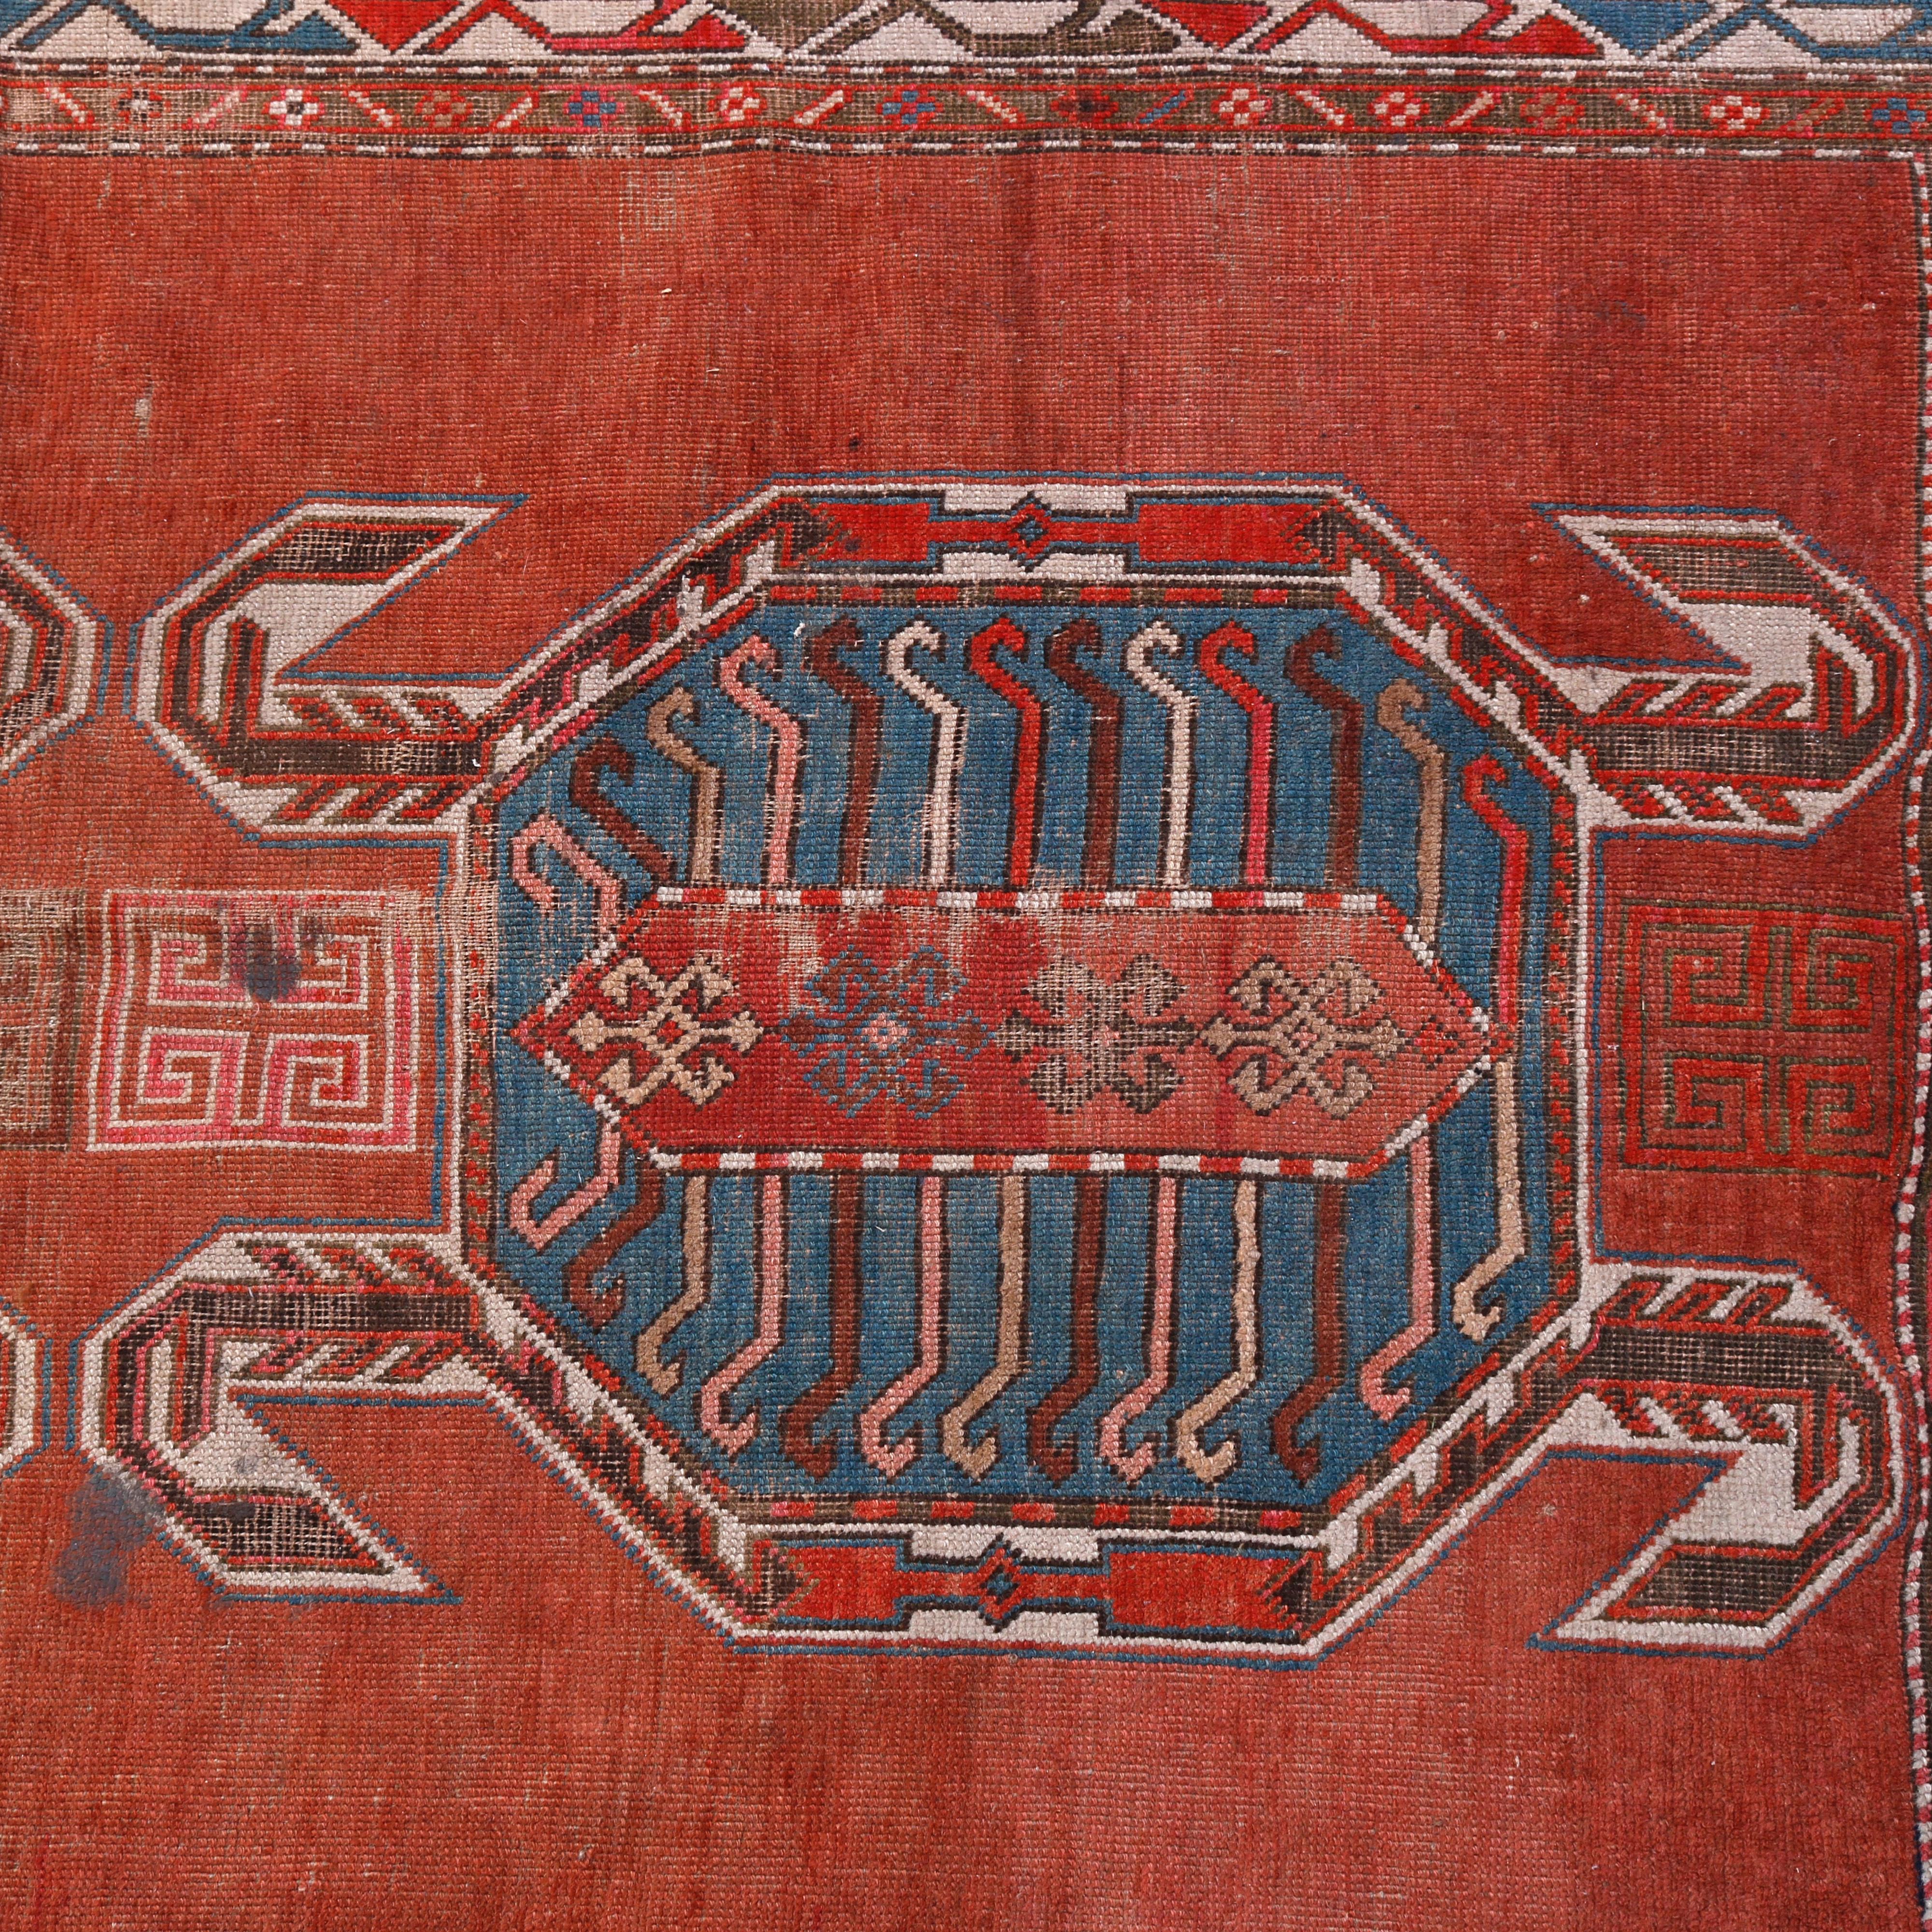 An antique figural Caucasian Lenkoran oriental rug offers wool construction with central facing stylized turtles on red ground, circa 1900.

Measures: 77